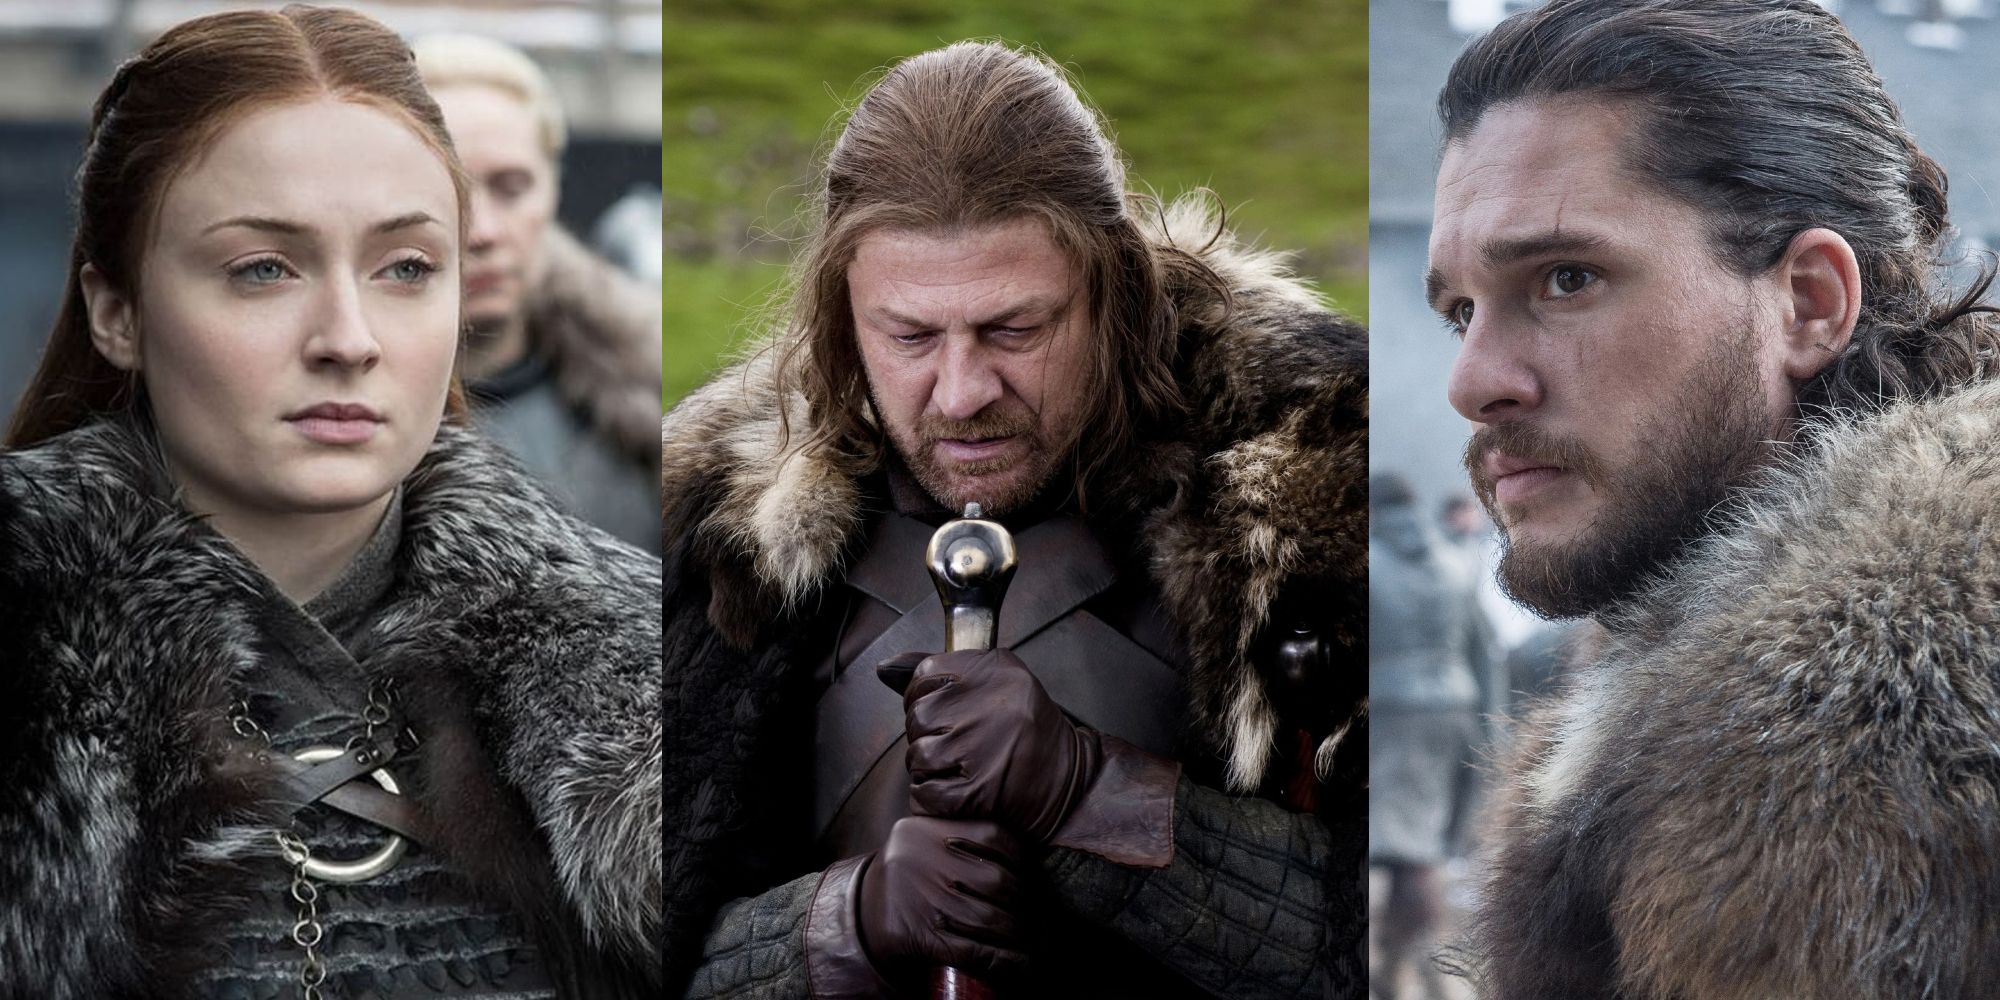 Sansa standing in Winterfell; Ned Stark with Ice praying before an execution; Jon Snow in his Stark attire